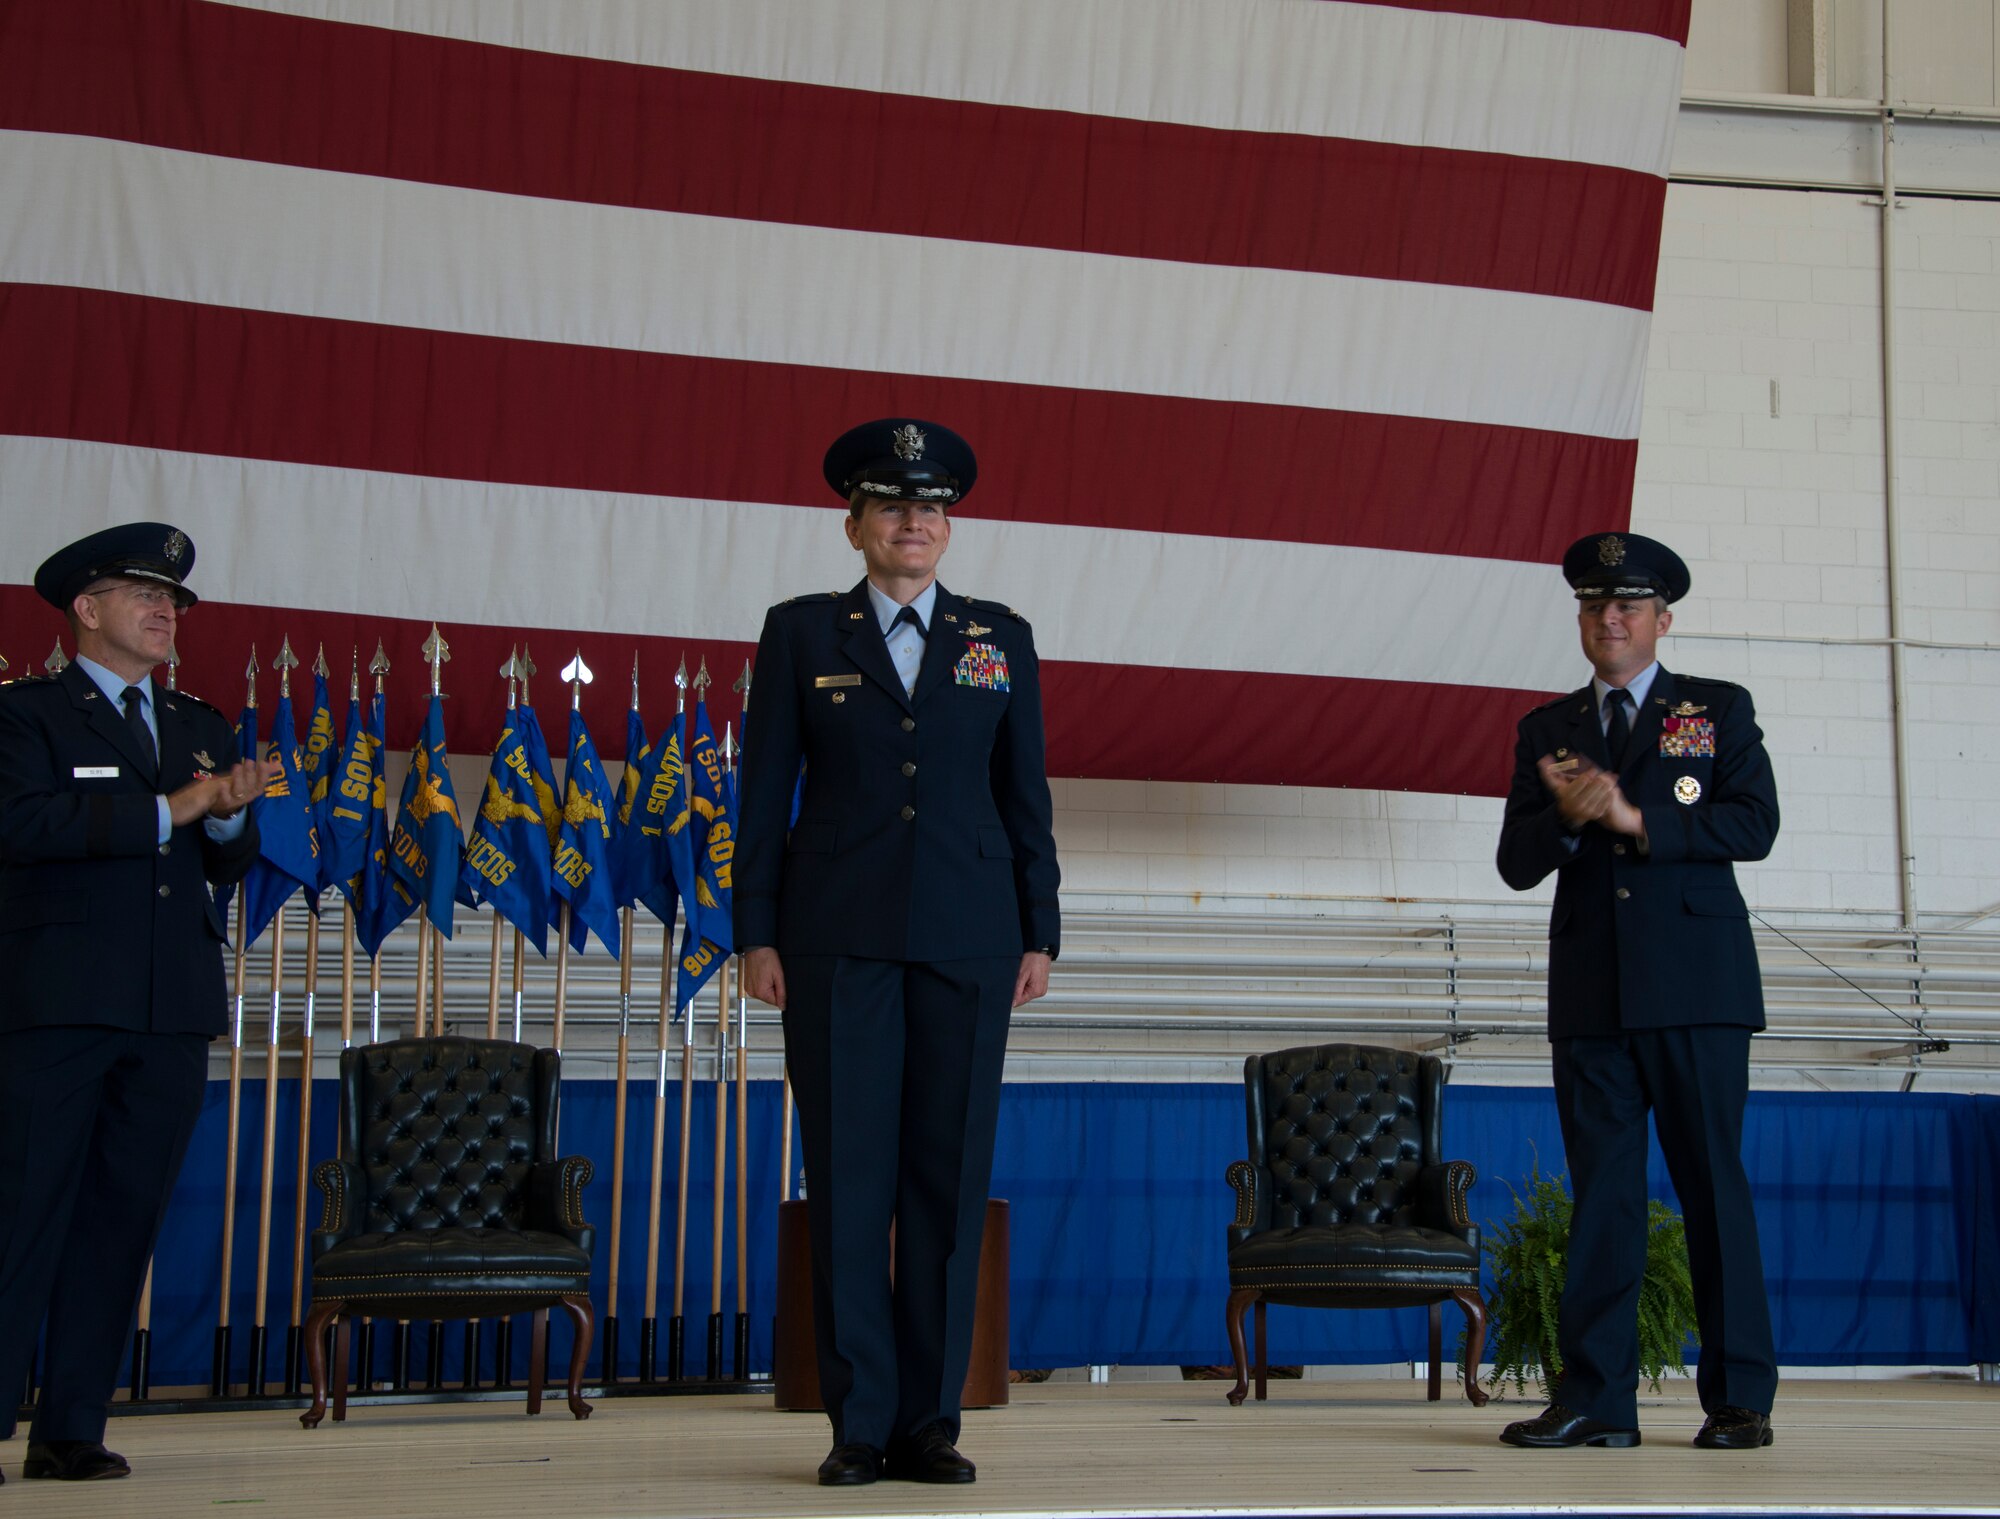 Three people standing on a stage in front of a flag.